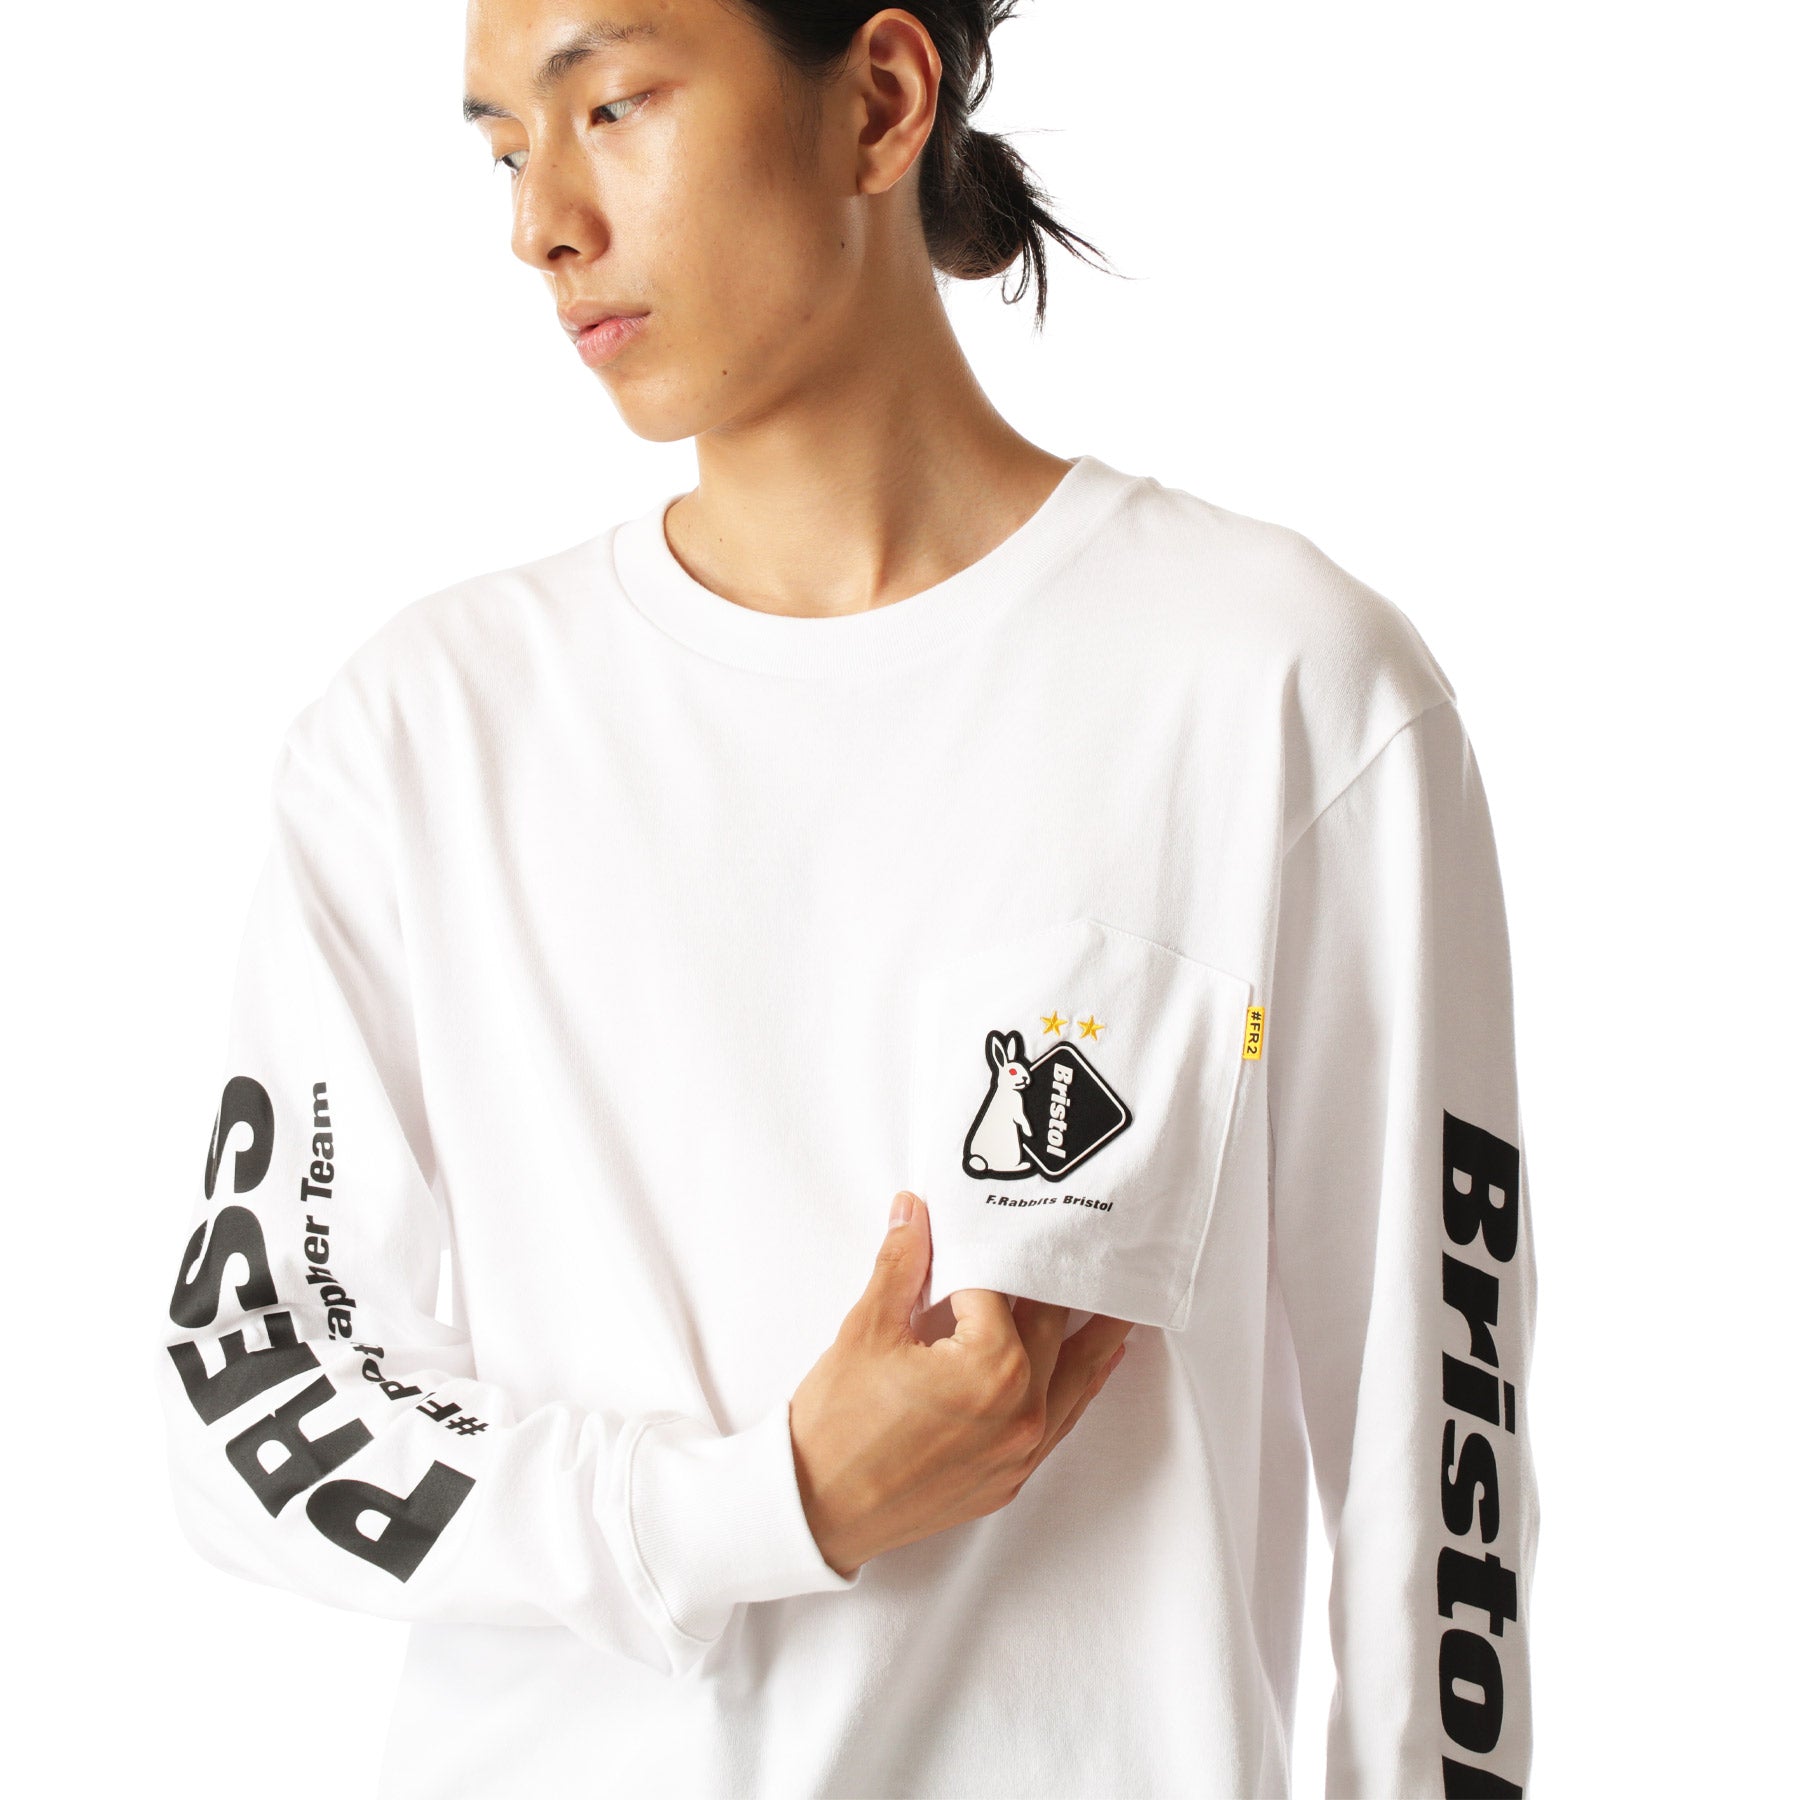 x FCRB L/S Tee FRC1111 White